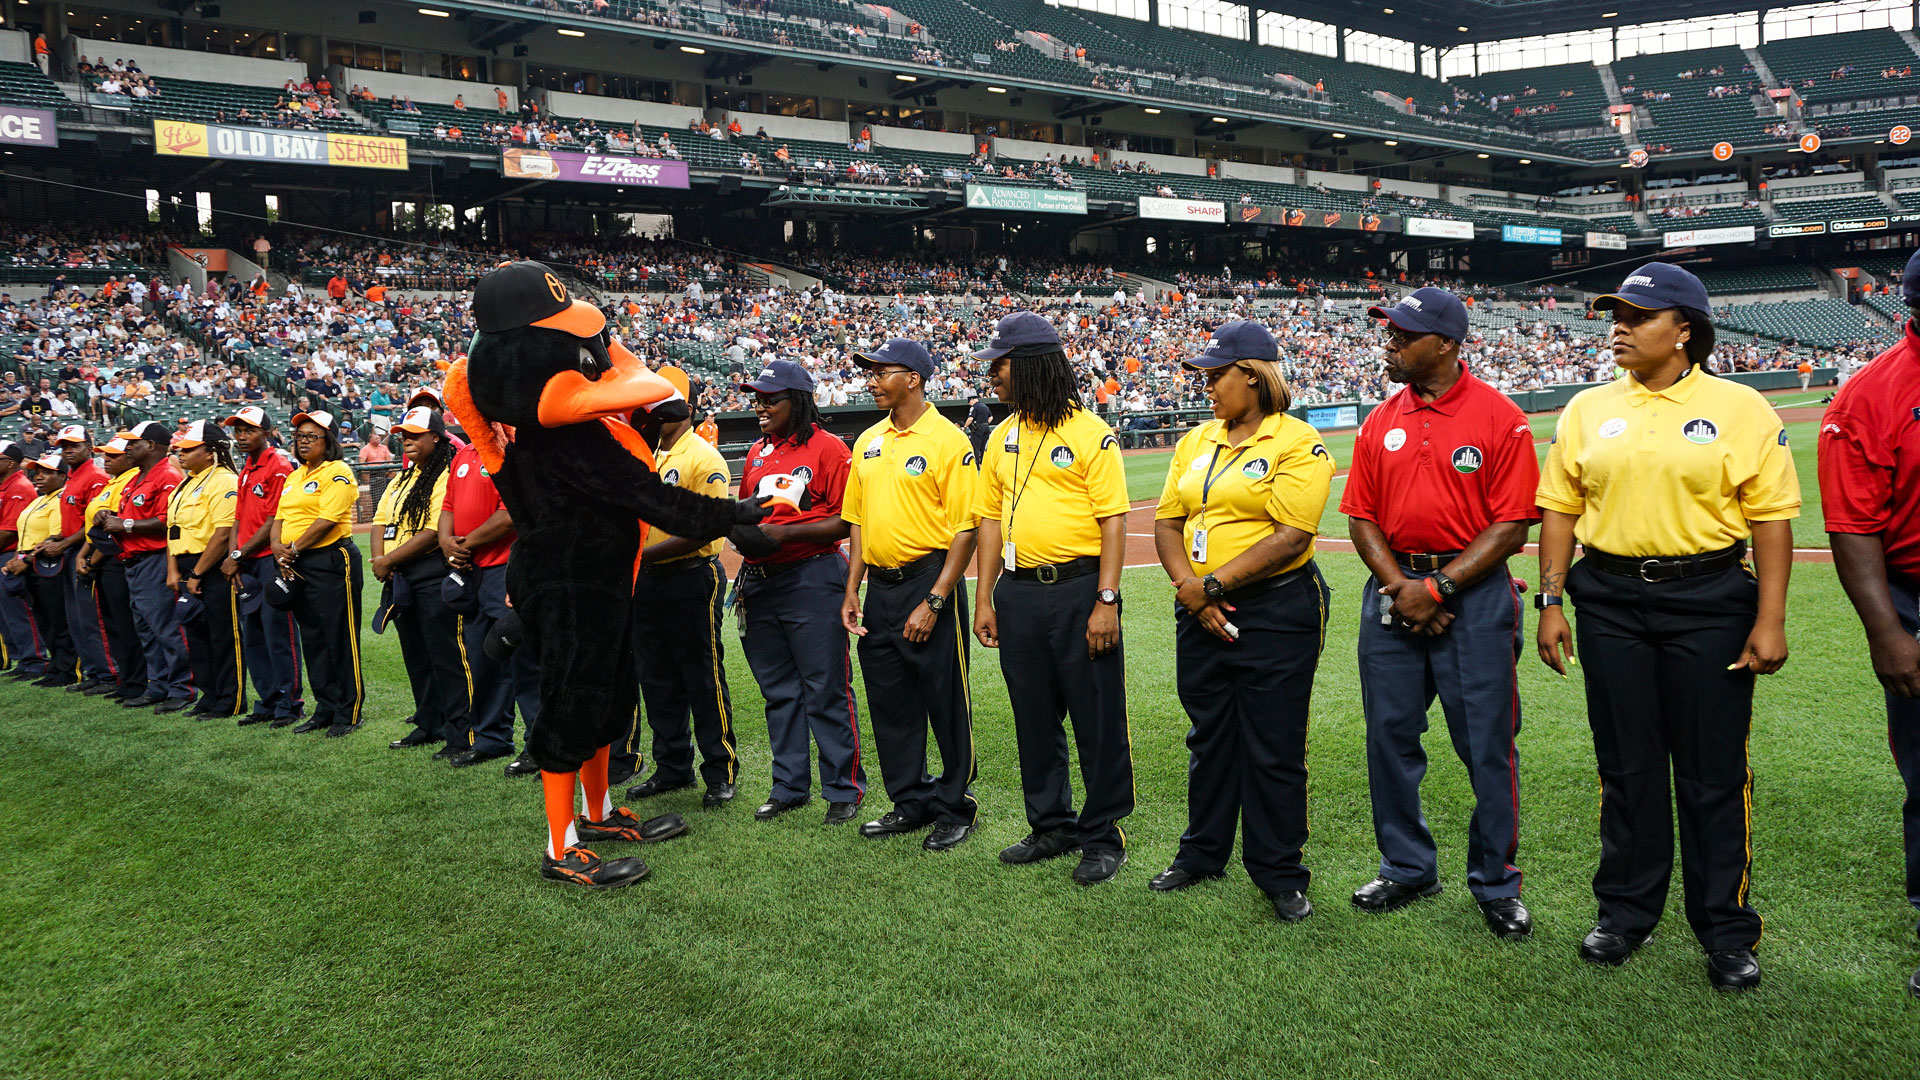 Downtown Partnership employees standing on the field at an Oriole's Game being recognized for their outstanding achievements.